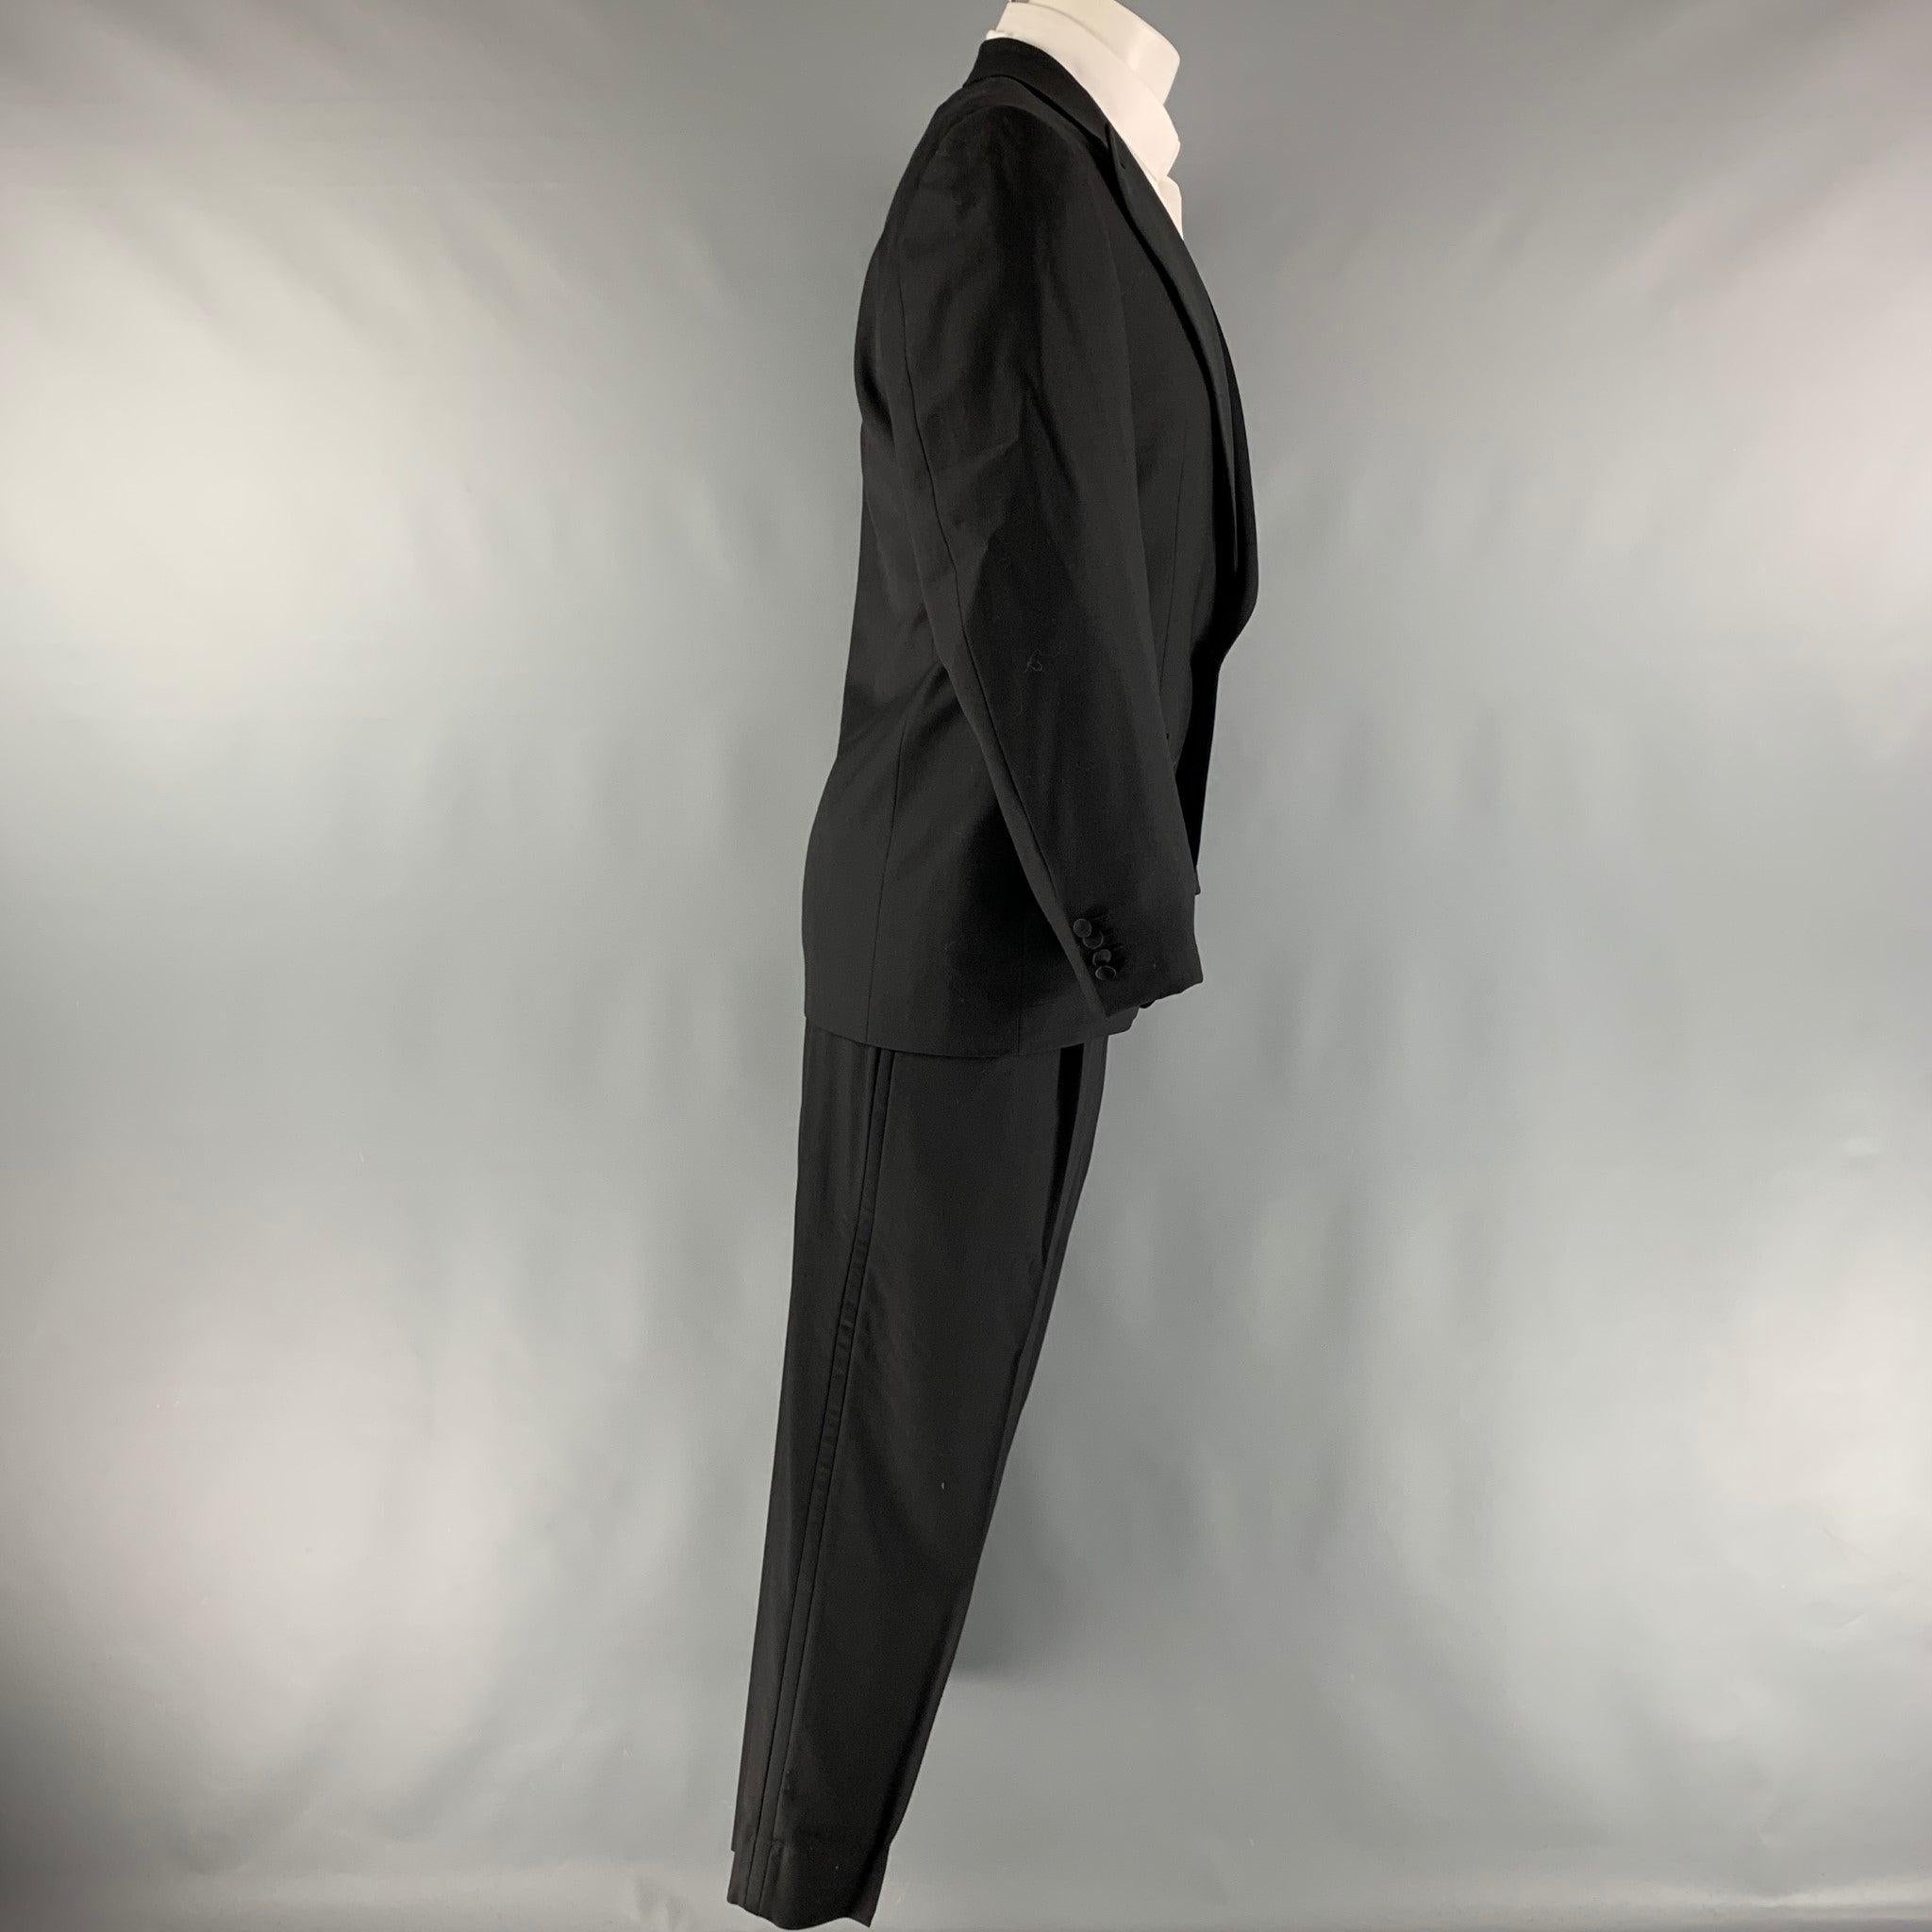 ERMENEGILDO ZEGNA for Neiman Marcus tuxedo comes in a black wool with a full liner and includes a single breasted, single button sport coat with a peak lapel and matching pleated front trousers. Made in Switzerland.Excellent Pre-Owned Condition.